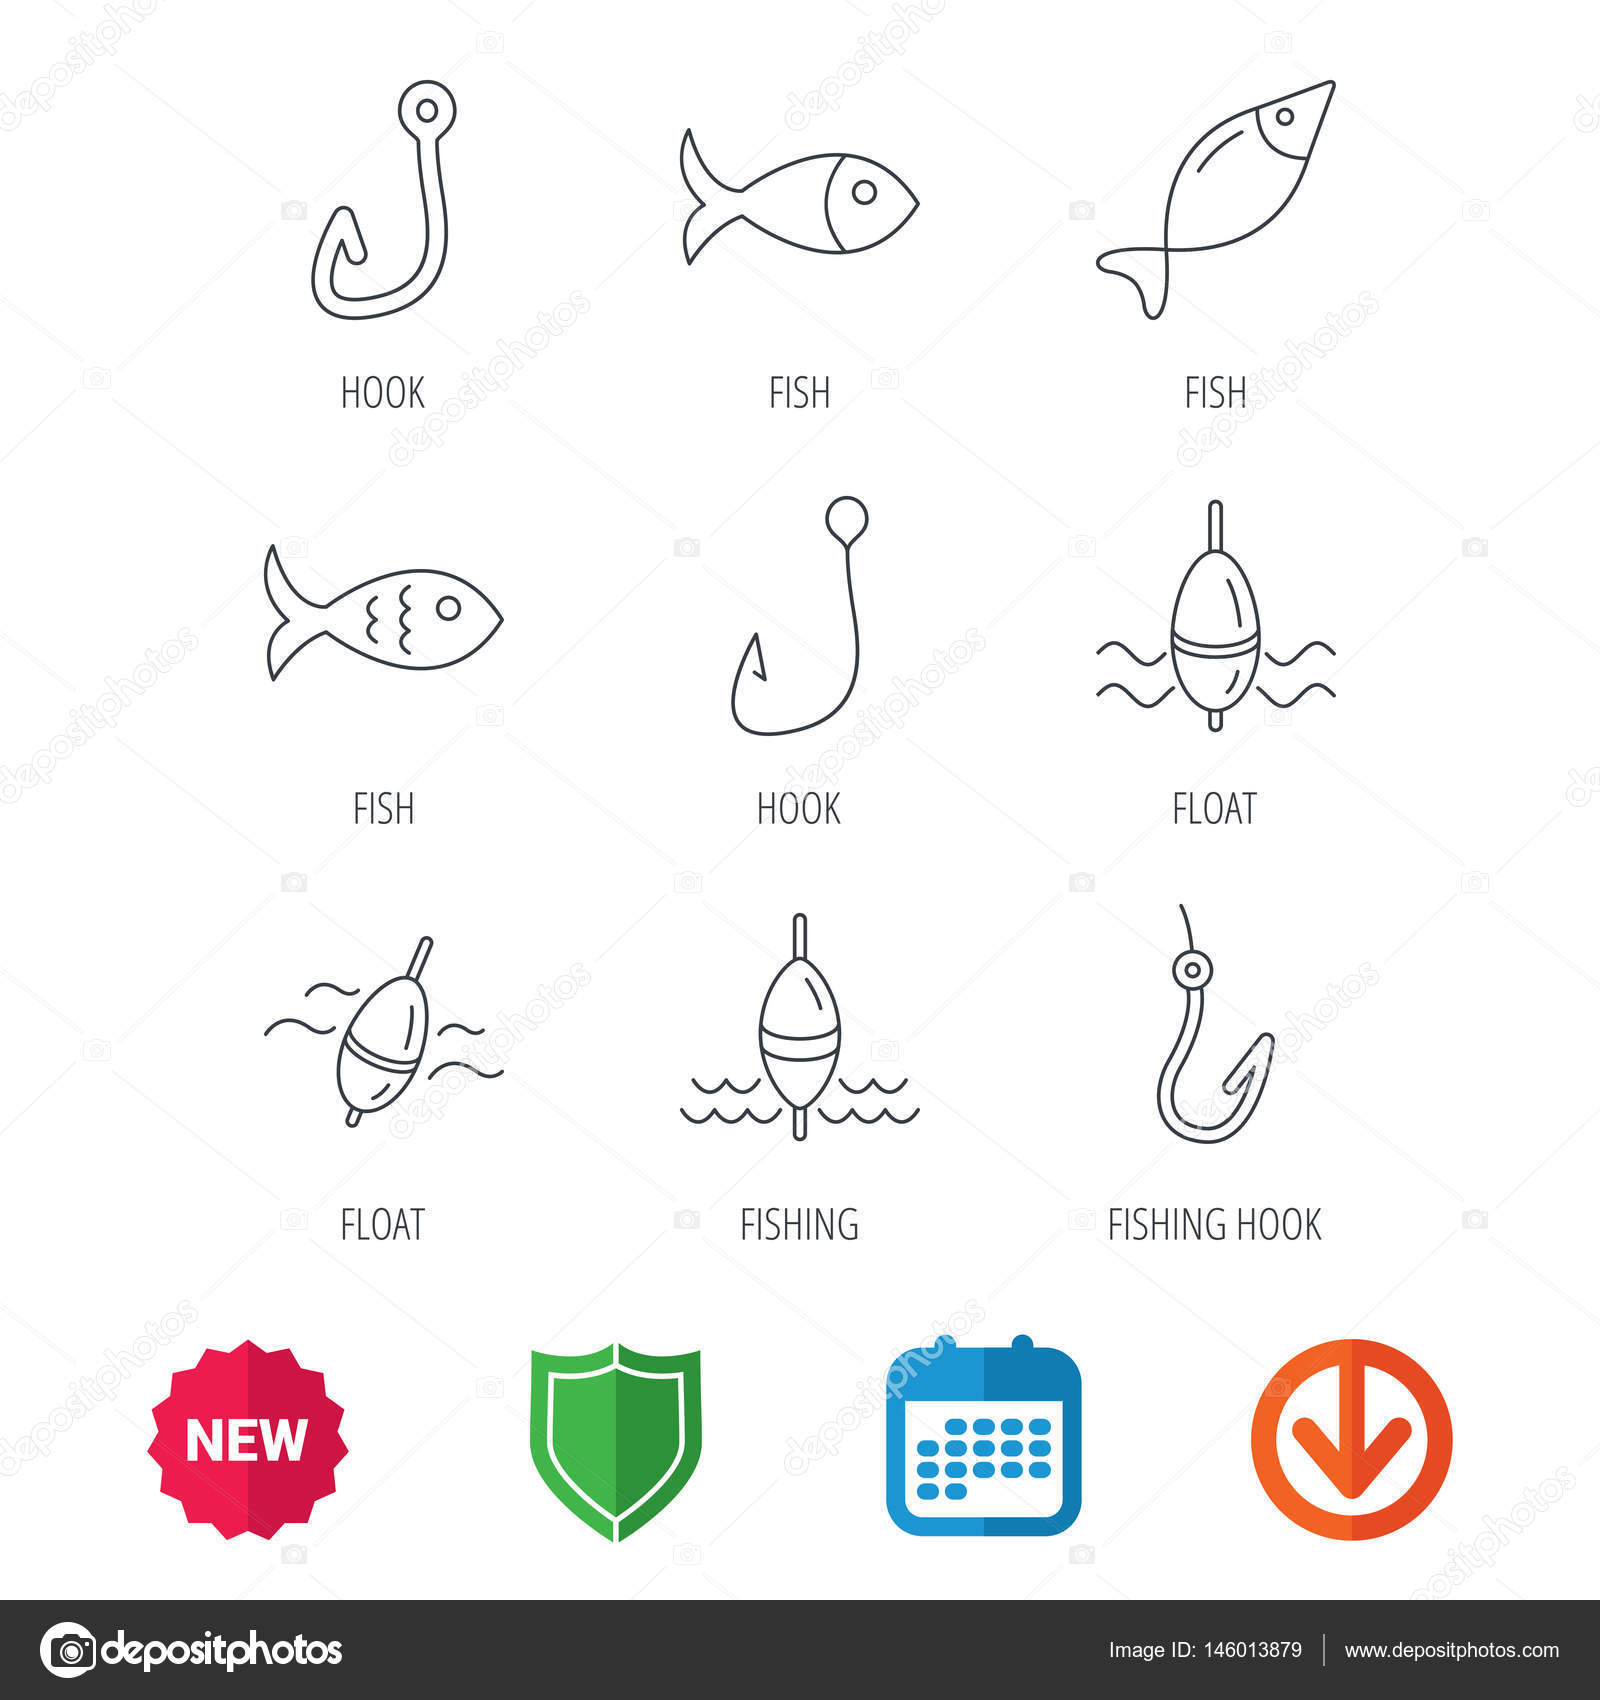 Fishing hook and float icons. Fish, waves signs. — Stock Vector ...